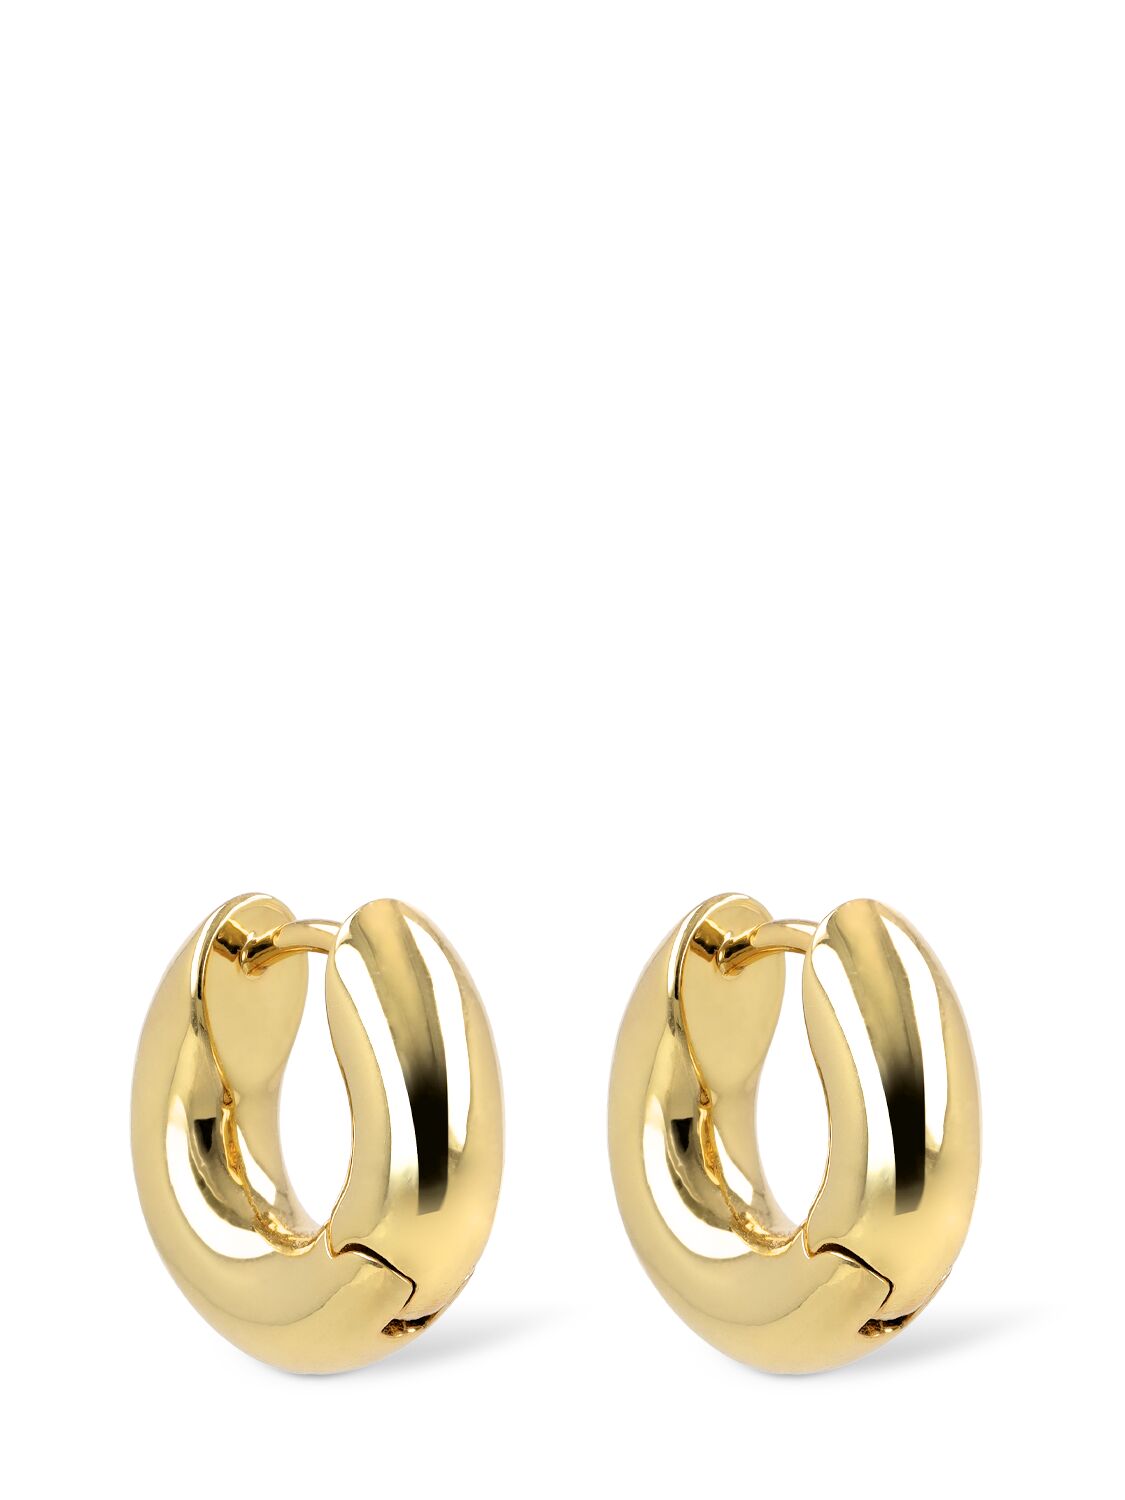 Image of Small Bold Link Hoops Earrings